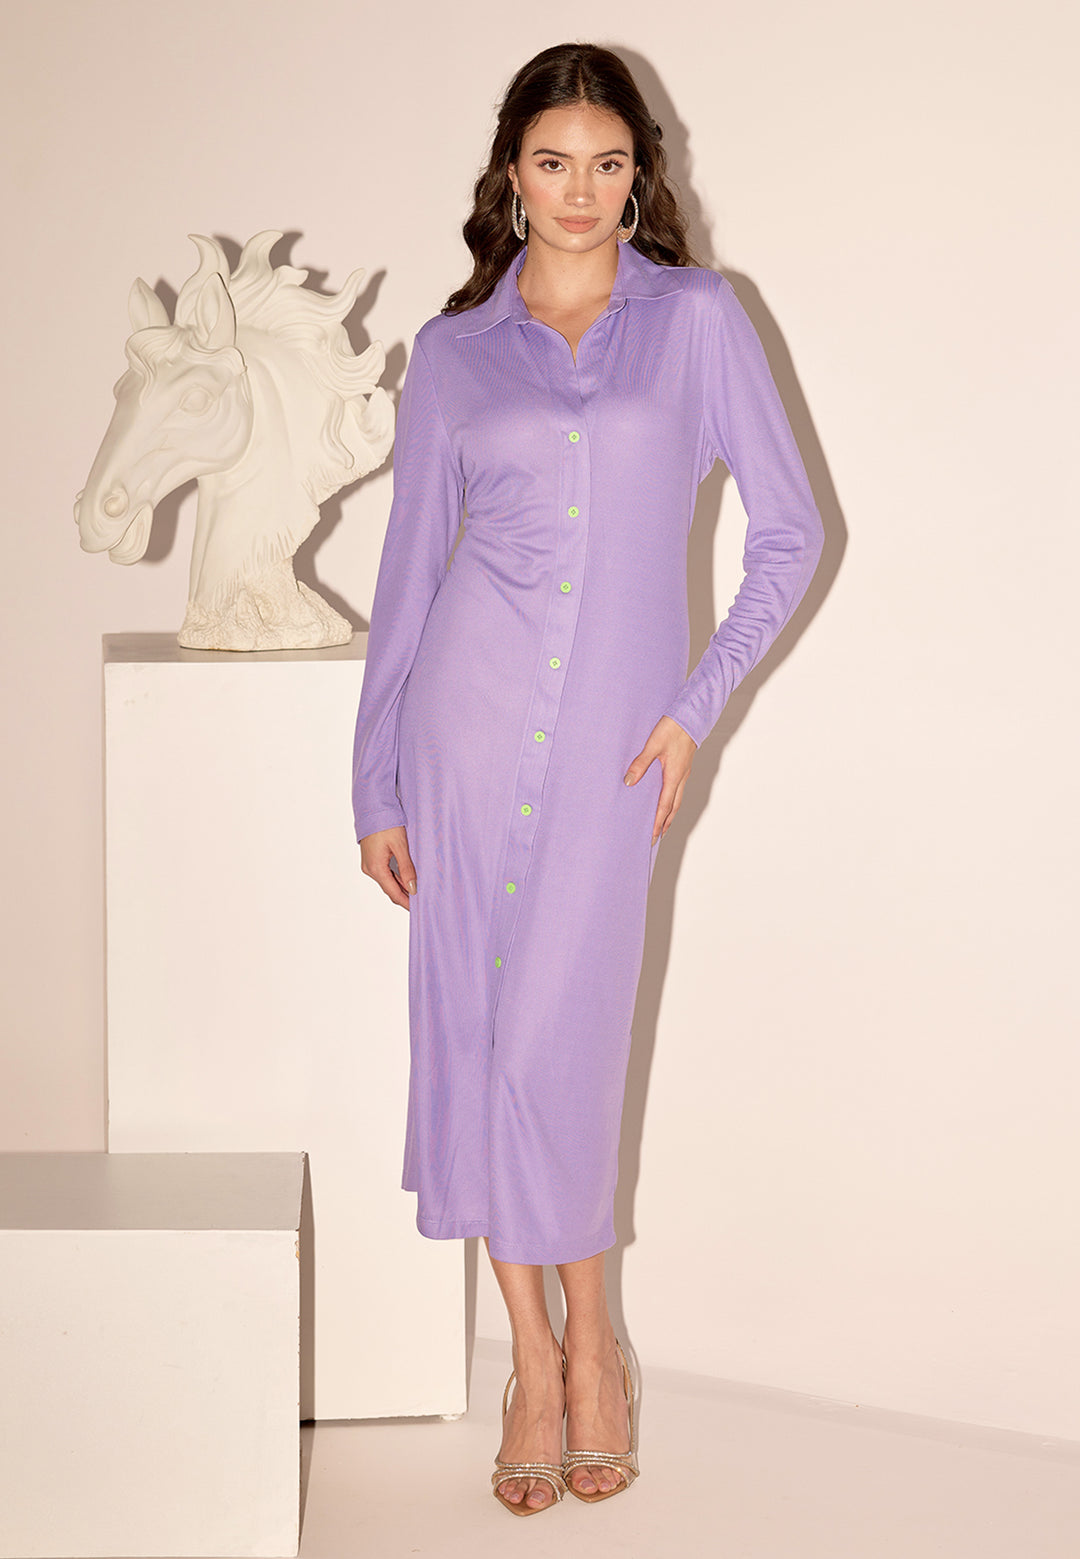 Periwinkle Lounging Dress